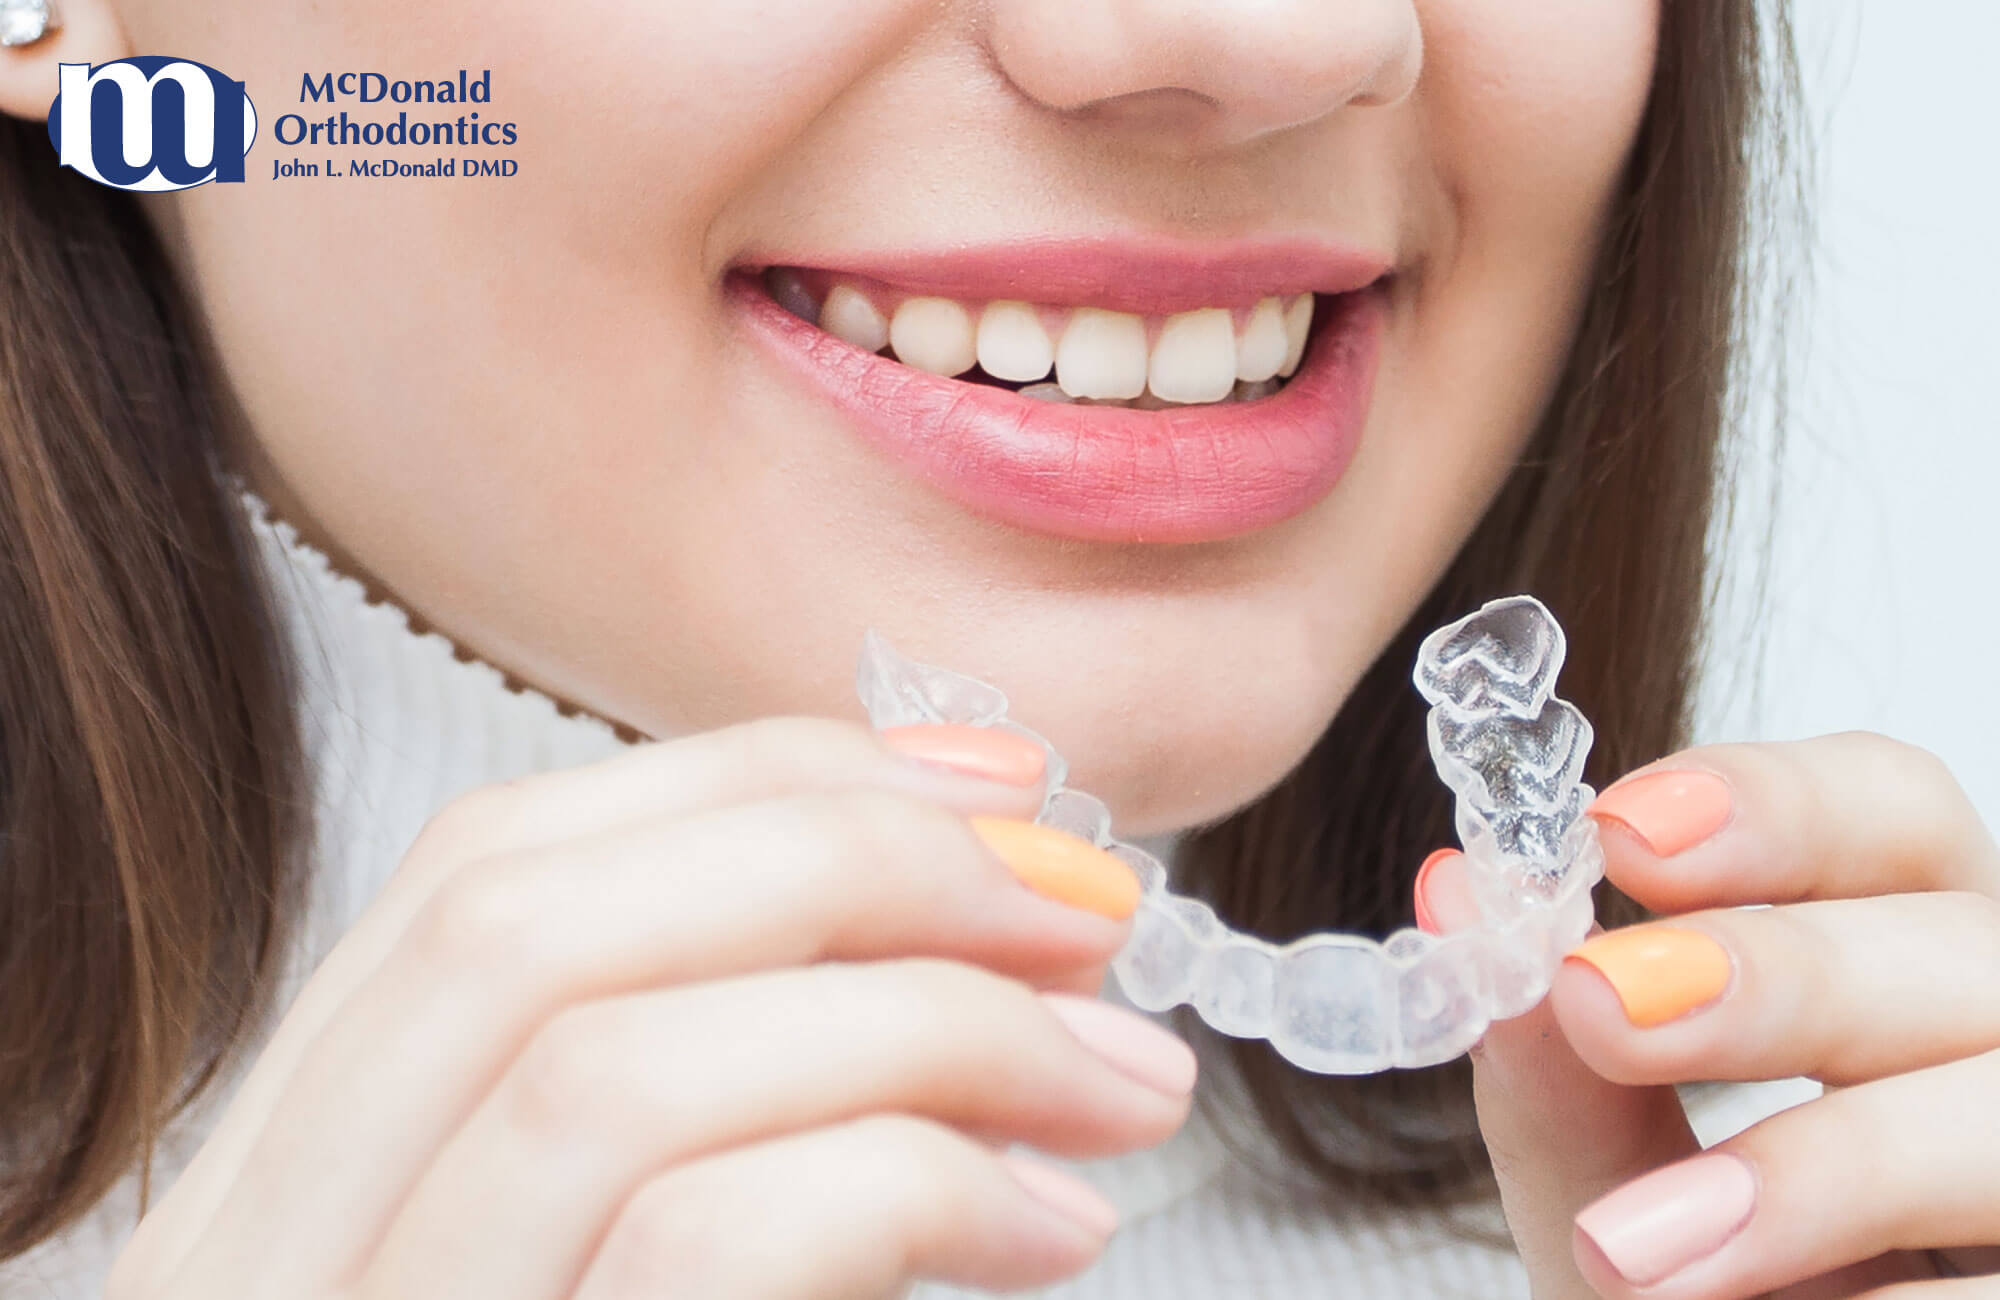 DIY clear braces or clear aligners can seem like a convenient option, but the lack of a supervised treatment can leave much to be desired.